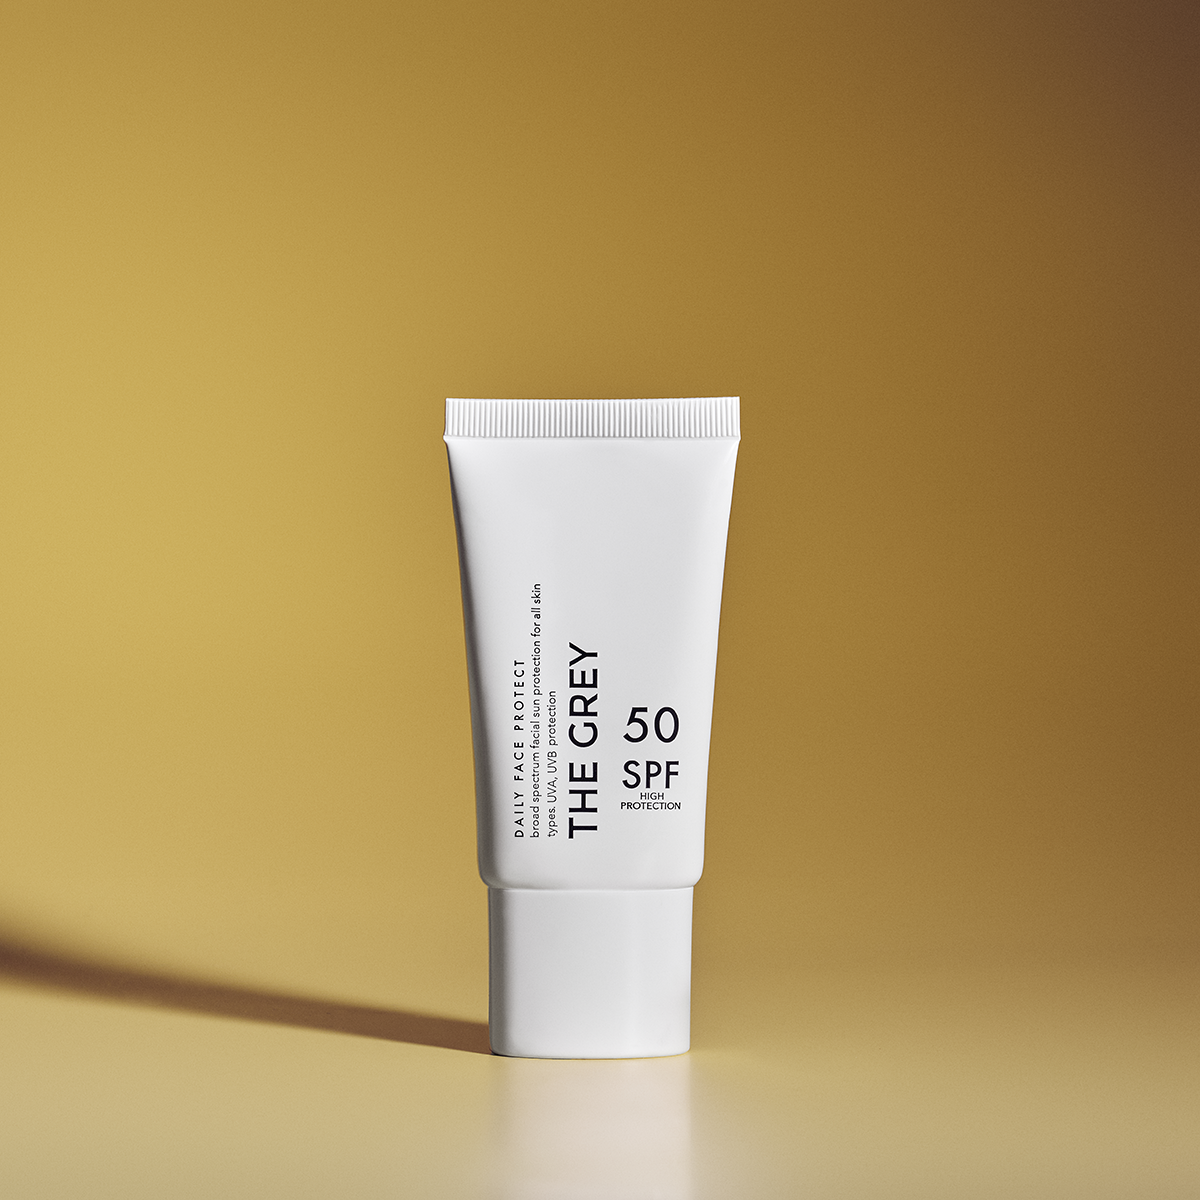 The Grey Skincare - Daily Face Protect SPF50